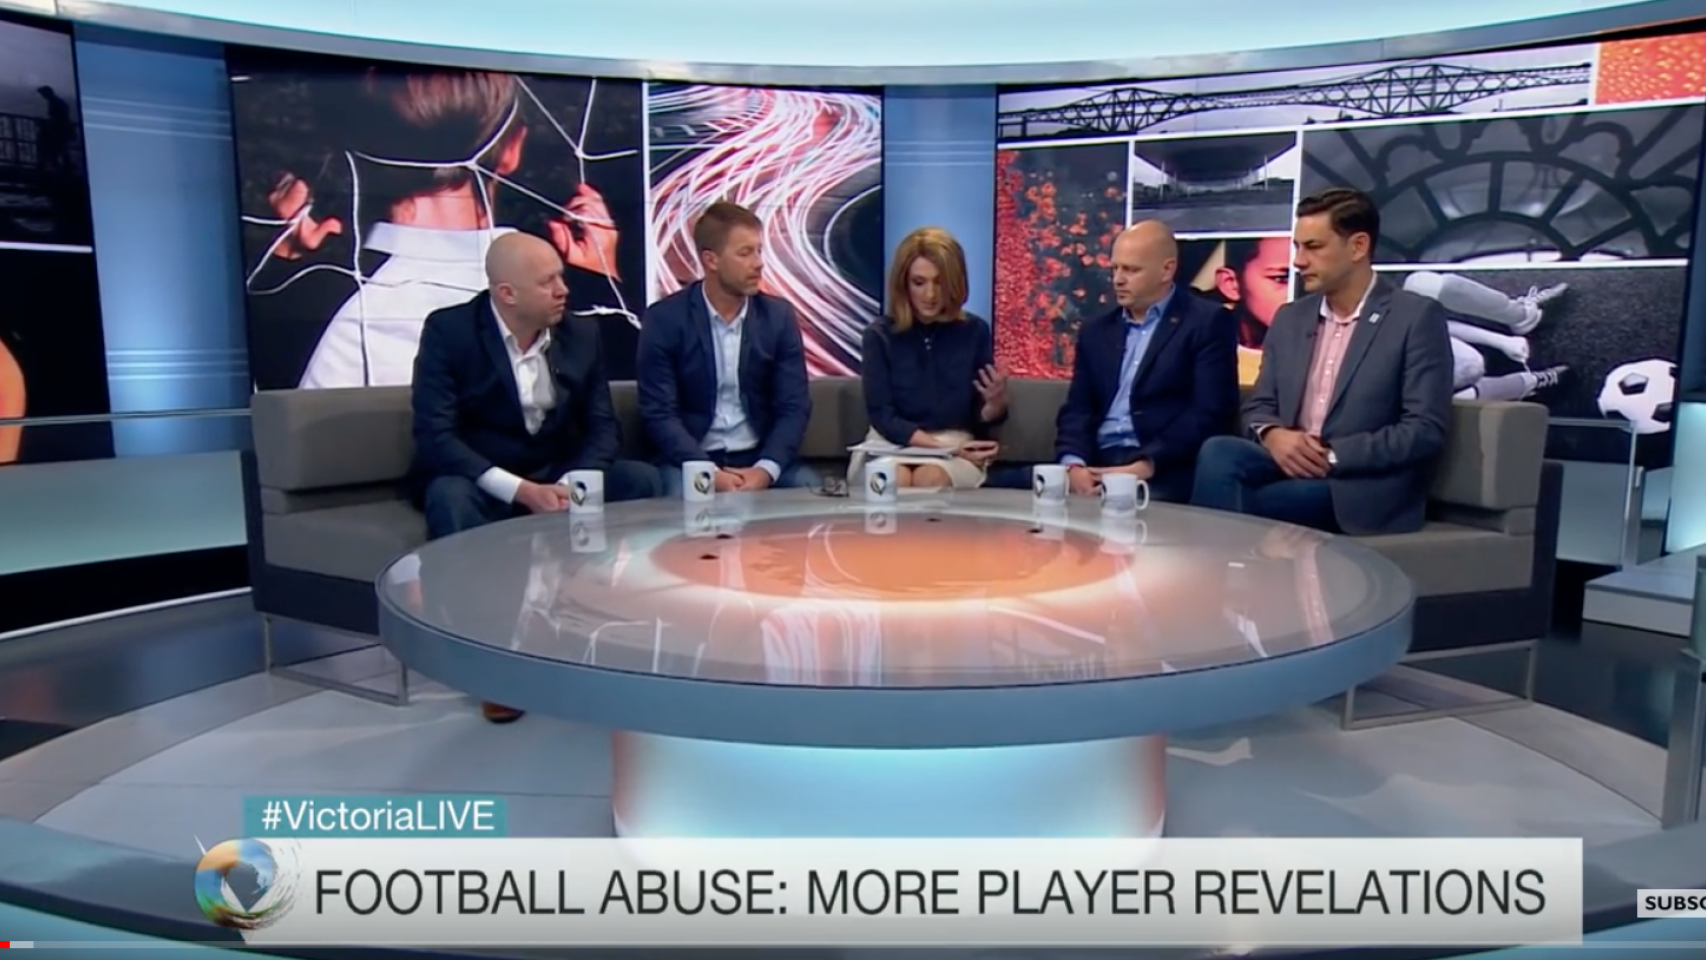 [European Union] Footballers speak out over sexual abuse - BBC News